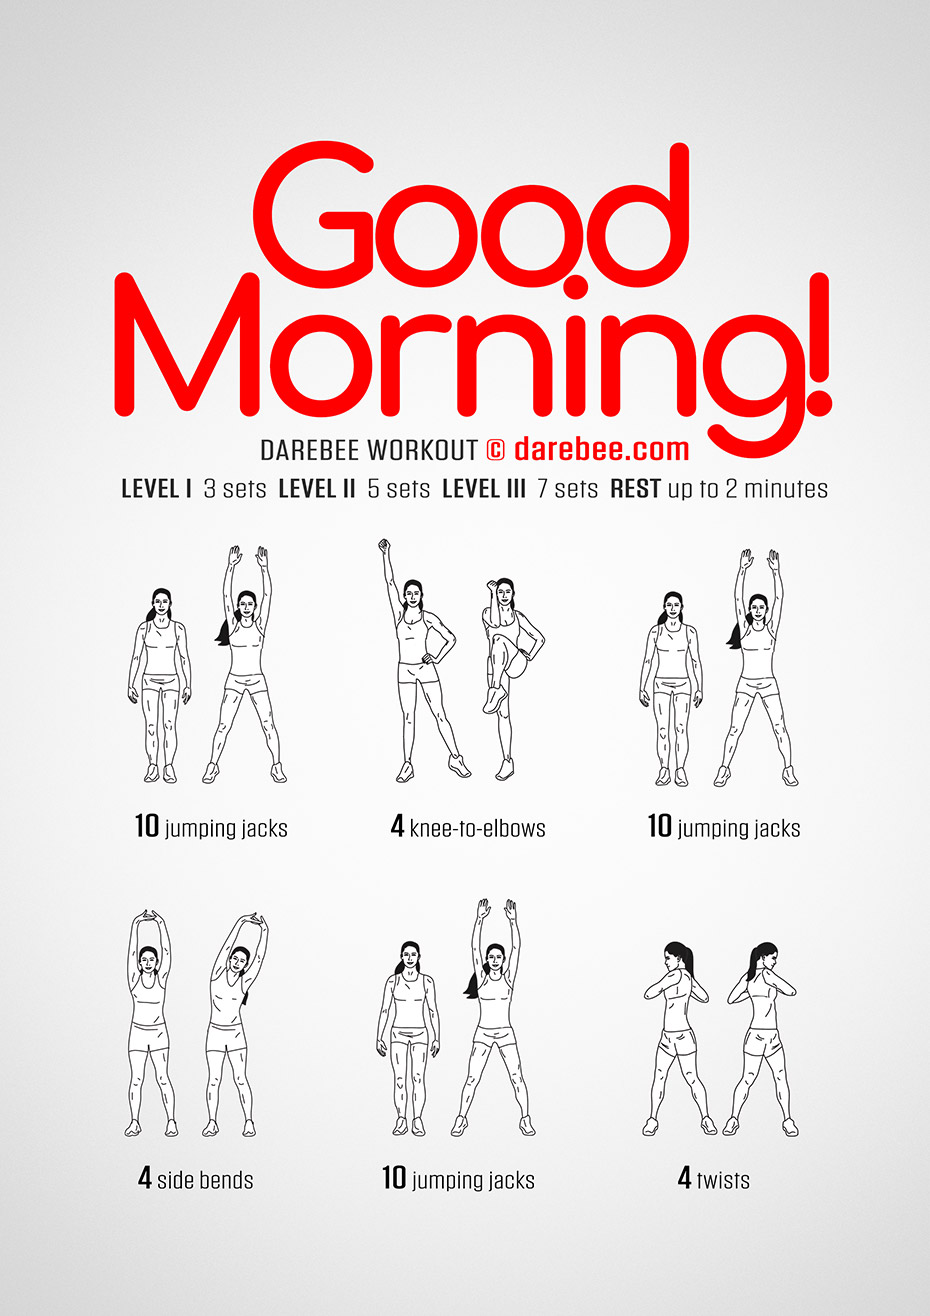 What is a good morning workout